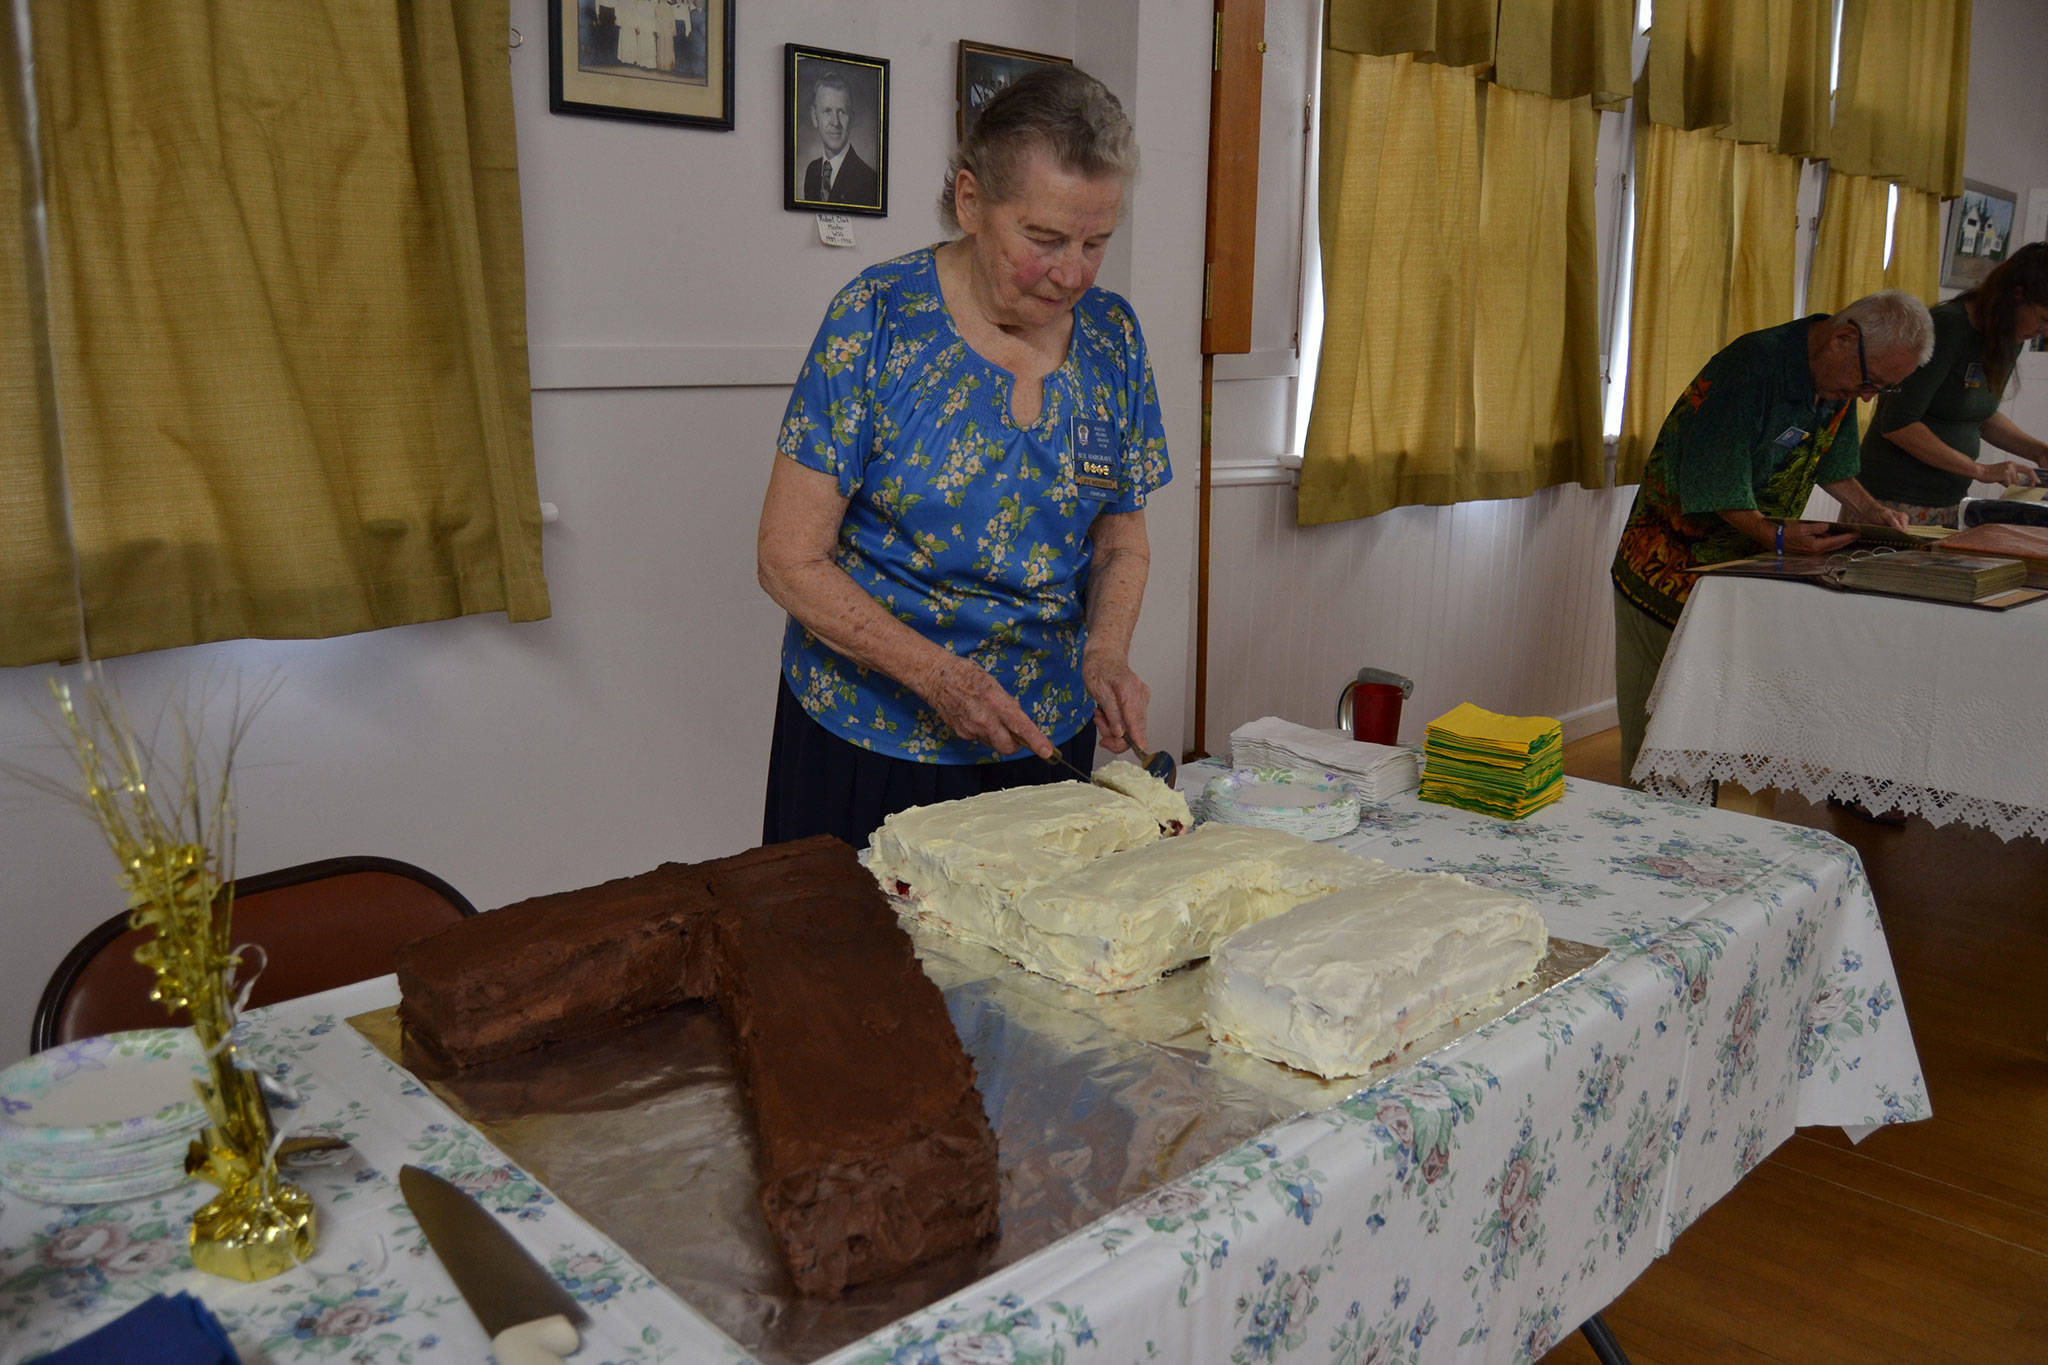 Sue Hargrave, organizer of the Sequim Prairie Grange’s 75th anniversary, cuts the cake she made commemorating the occasion on Aug. 9. Sequim Gazette photo by Matthew Nash